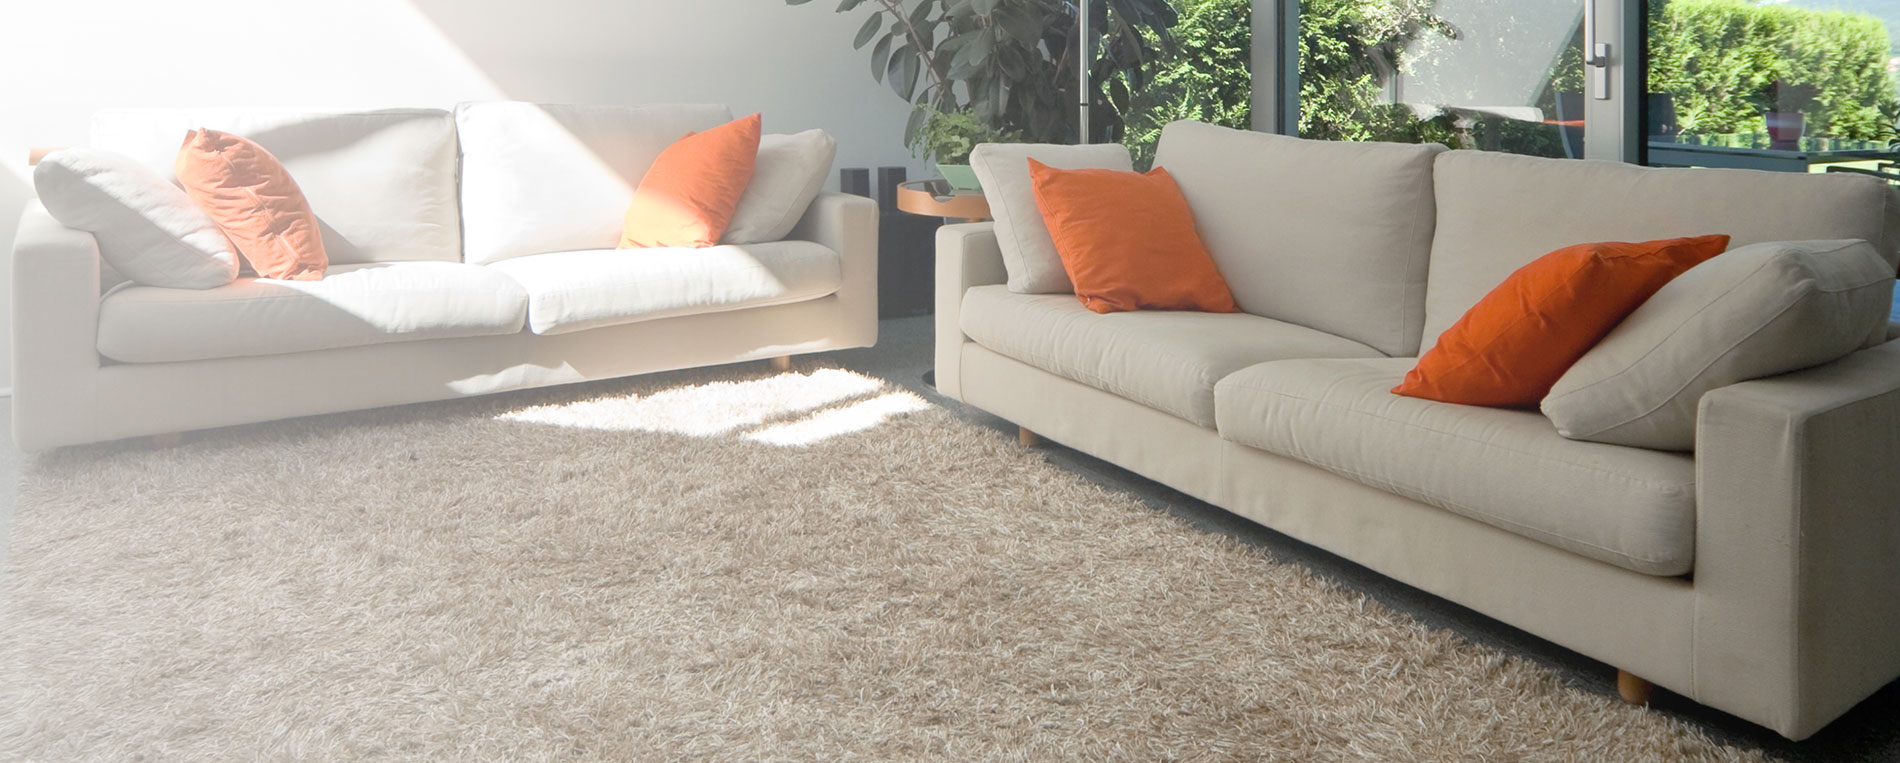 How Can You Tell If Your Carpet Cleaning Company Is Using Eco Friendly Products